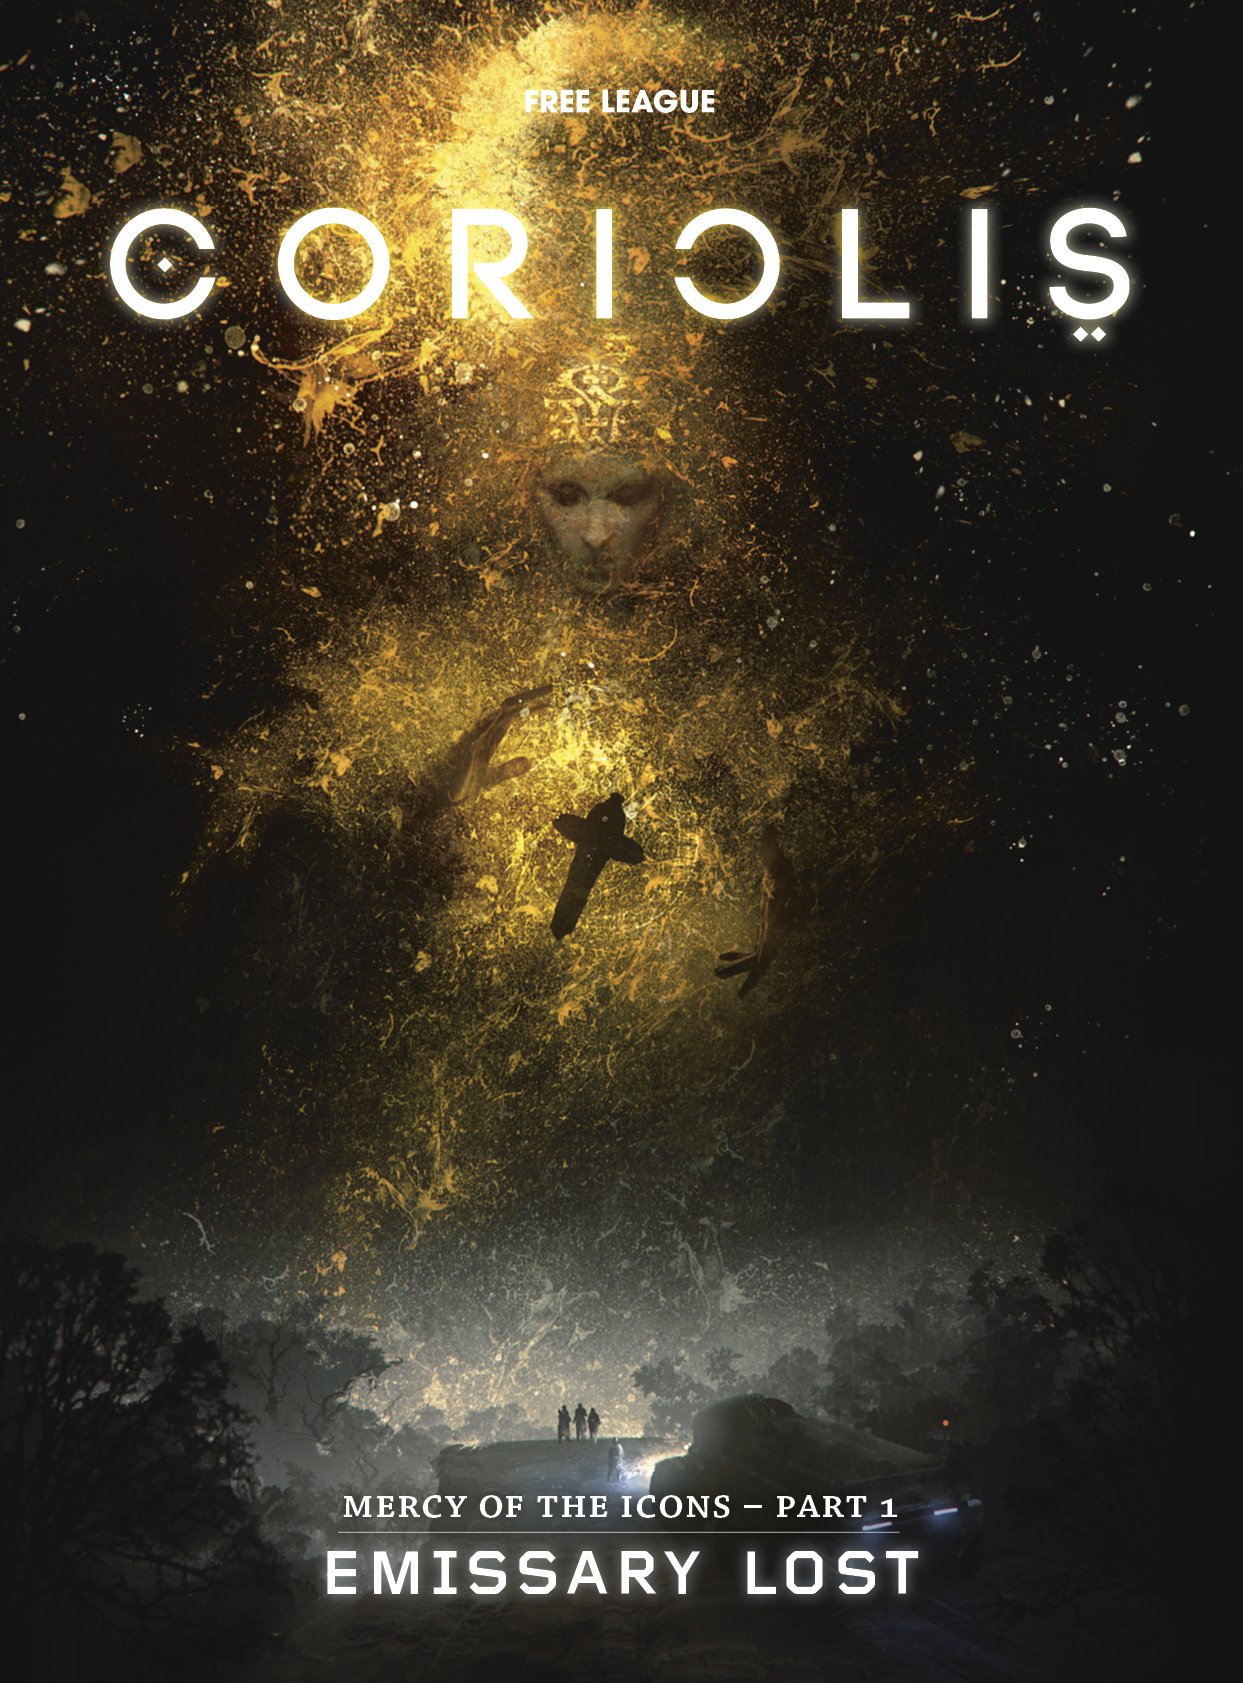 Coriolis Scifi RPG – Mercy of the Icons Part 1: Emissary Lost (Image: Free League Publishing (Fria Ligan))